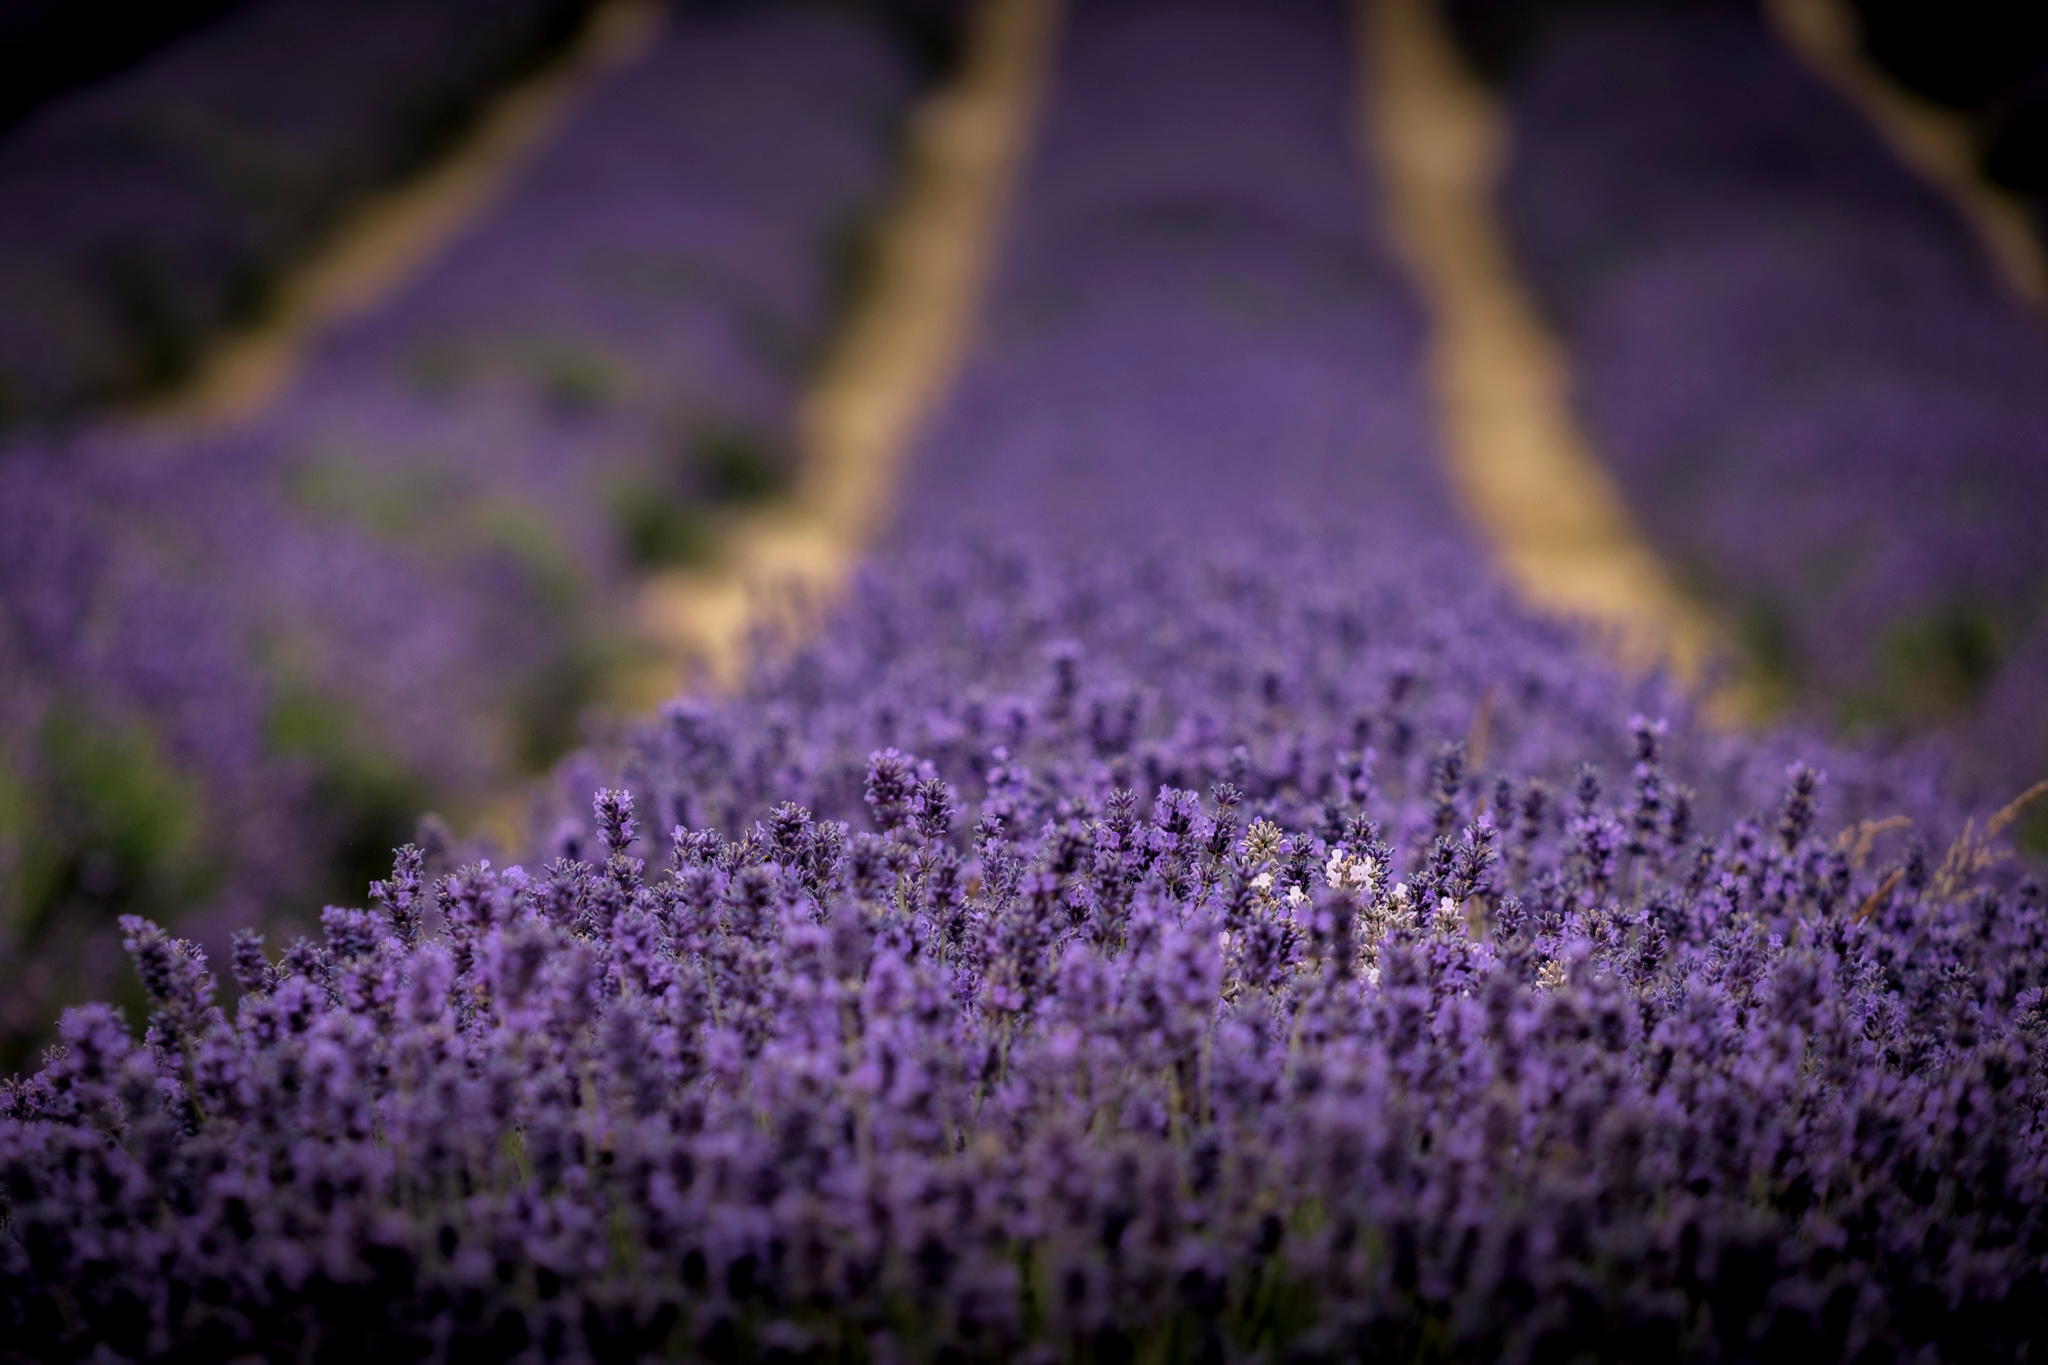 Field of Lavender in South London. By www.jasonrowphotography.co.uk